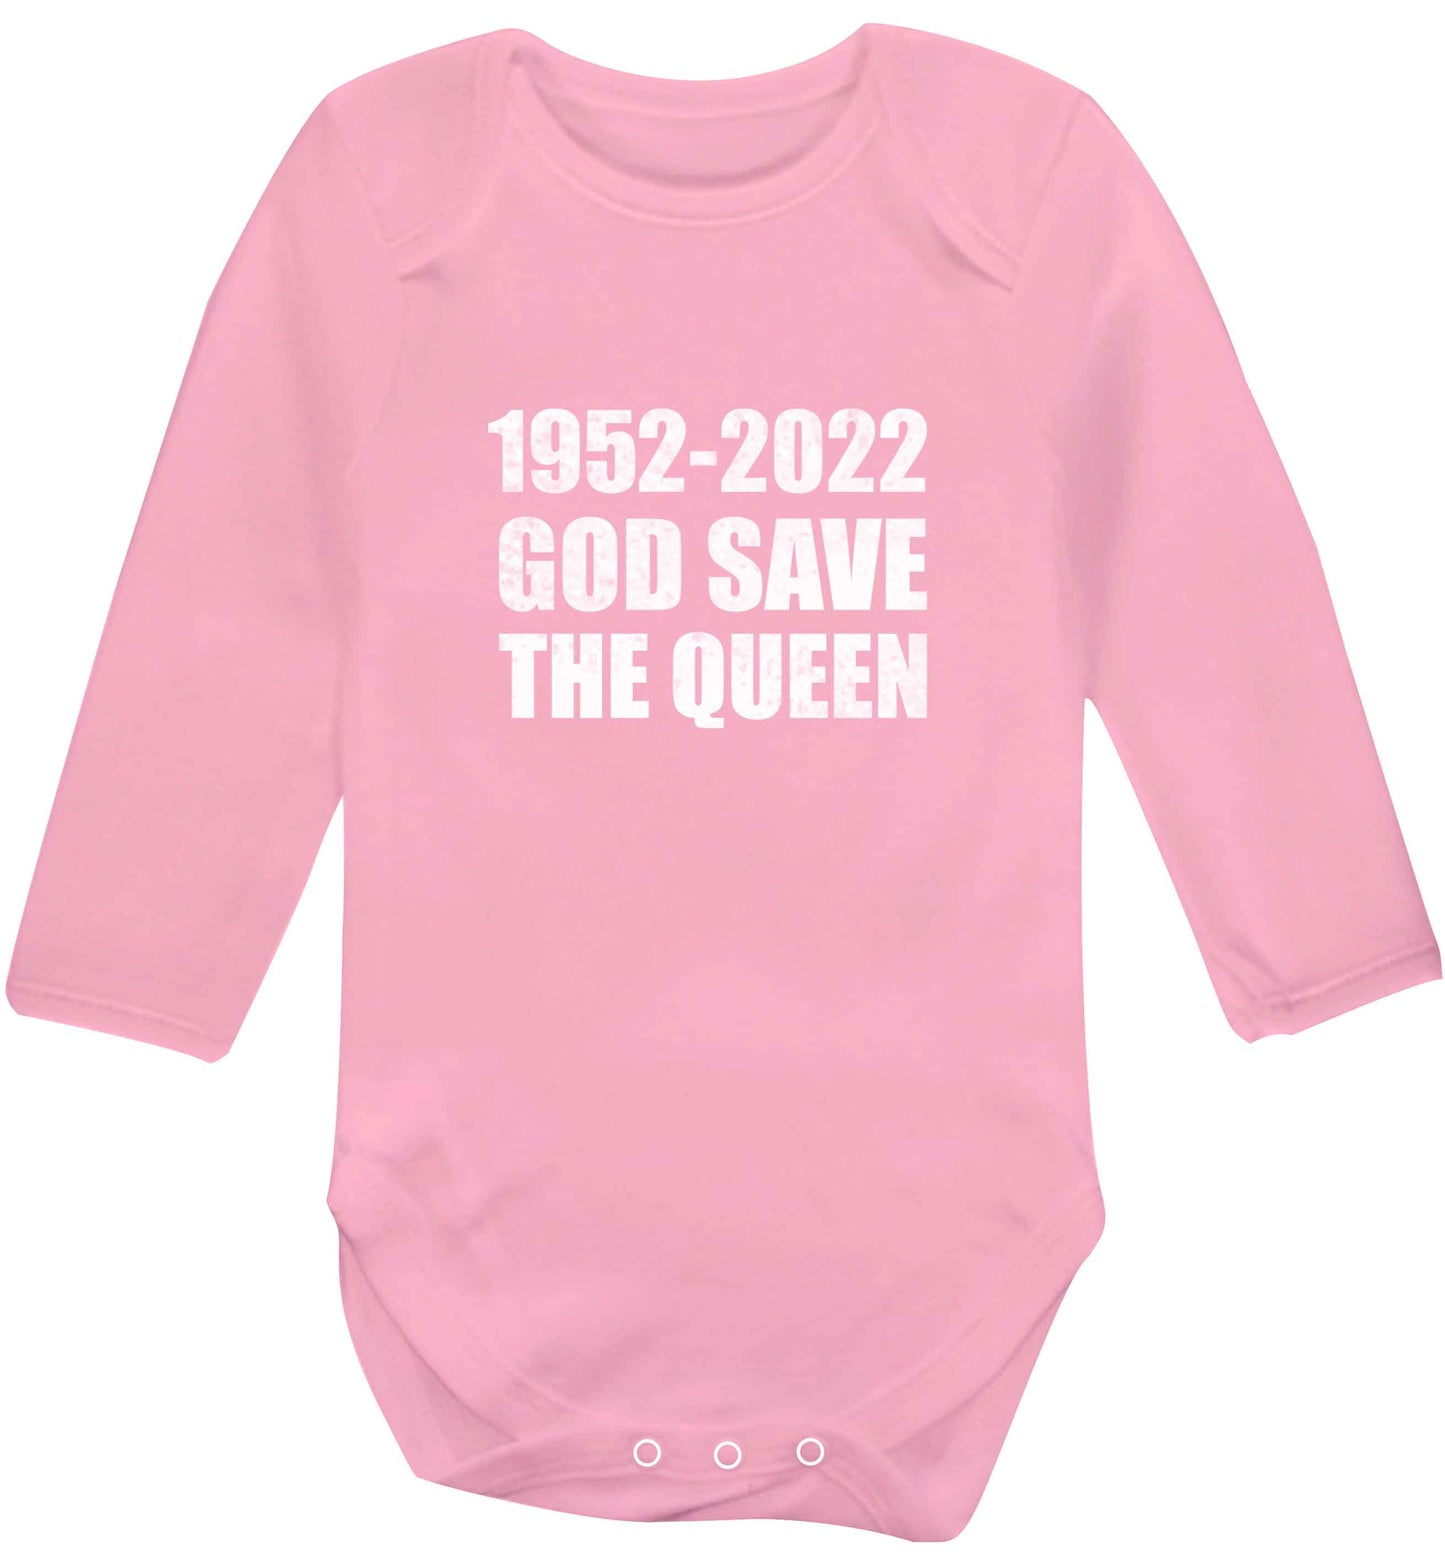 God save the queen baby vest long sleeved pale pink 6-12 months